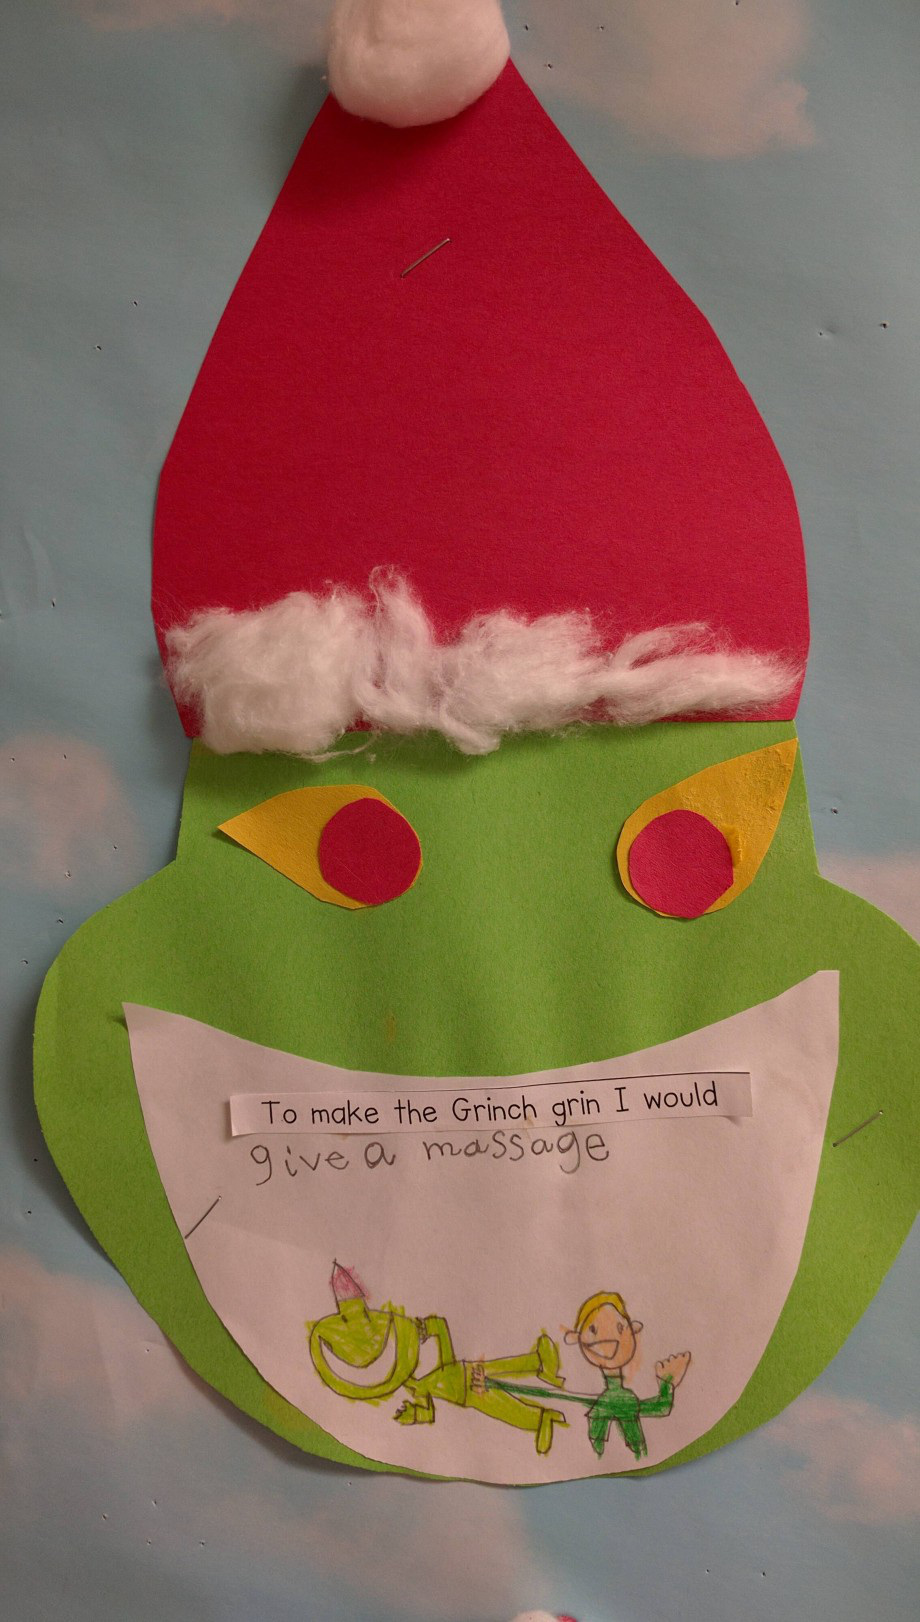 grinch prom ask - To make the Grinch grin I would give a massage